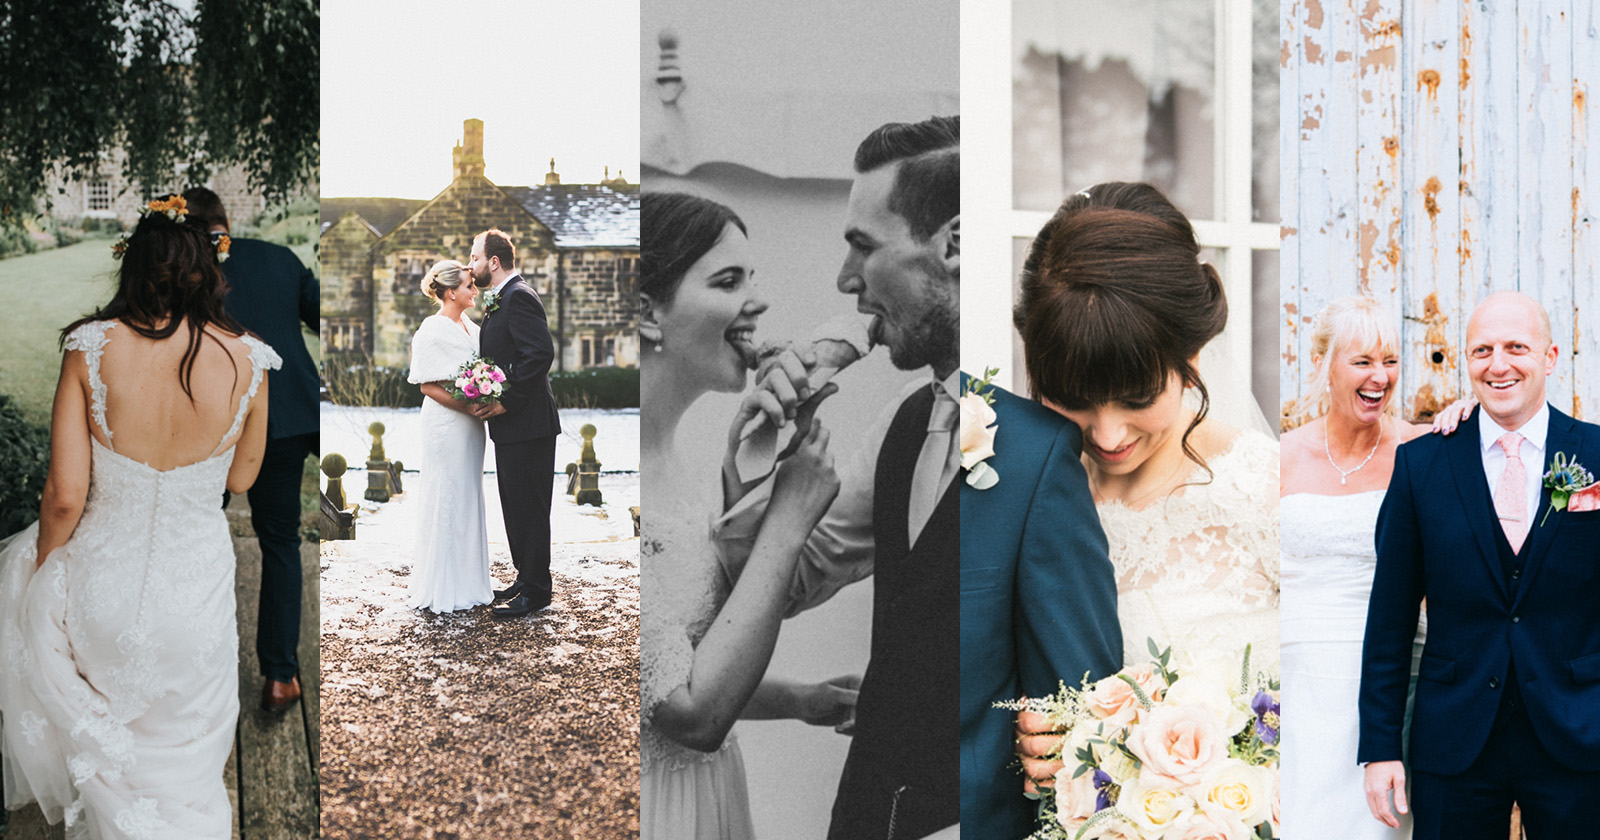 10 Important Lessons I've Learned as a Professional Wedding Photographer